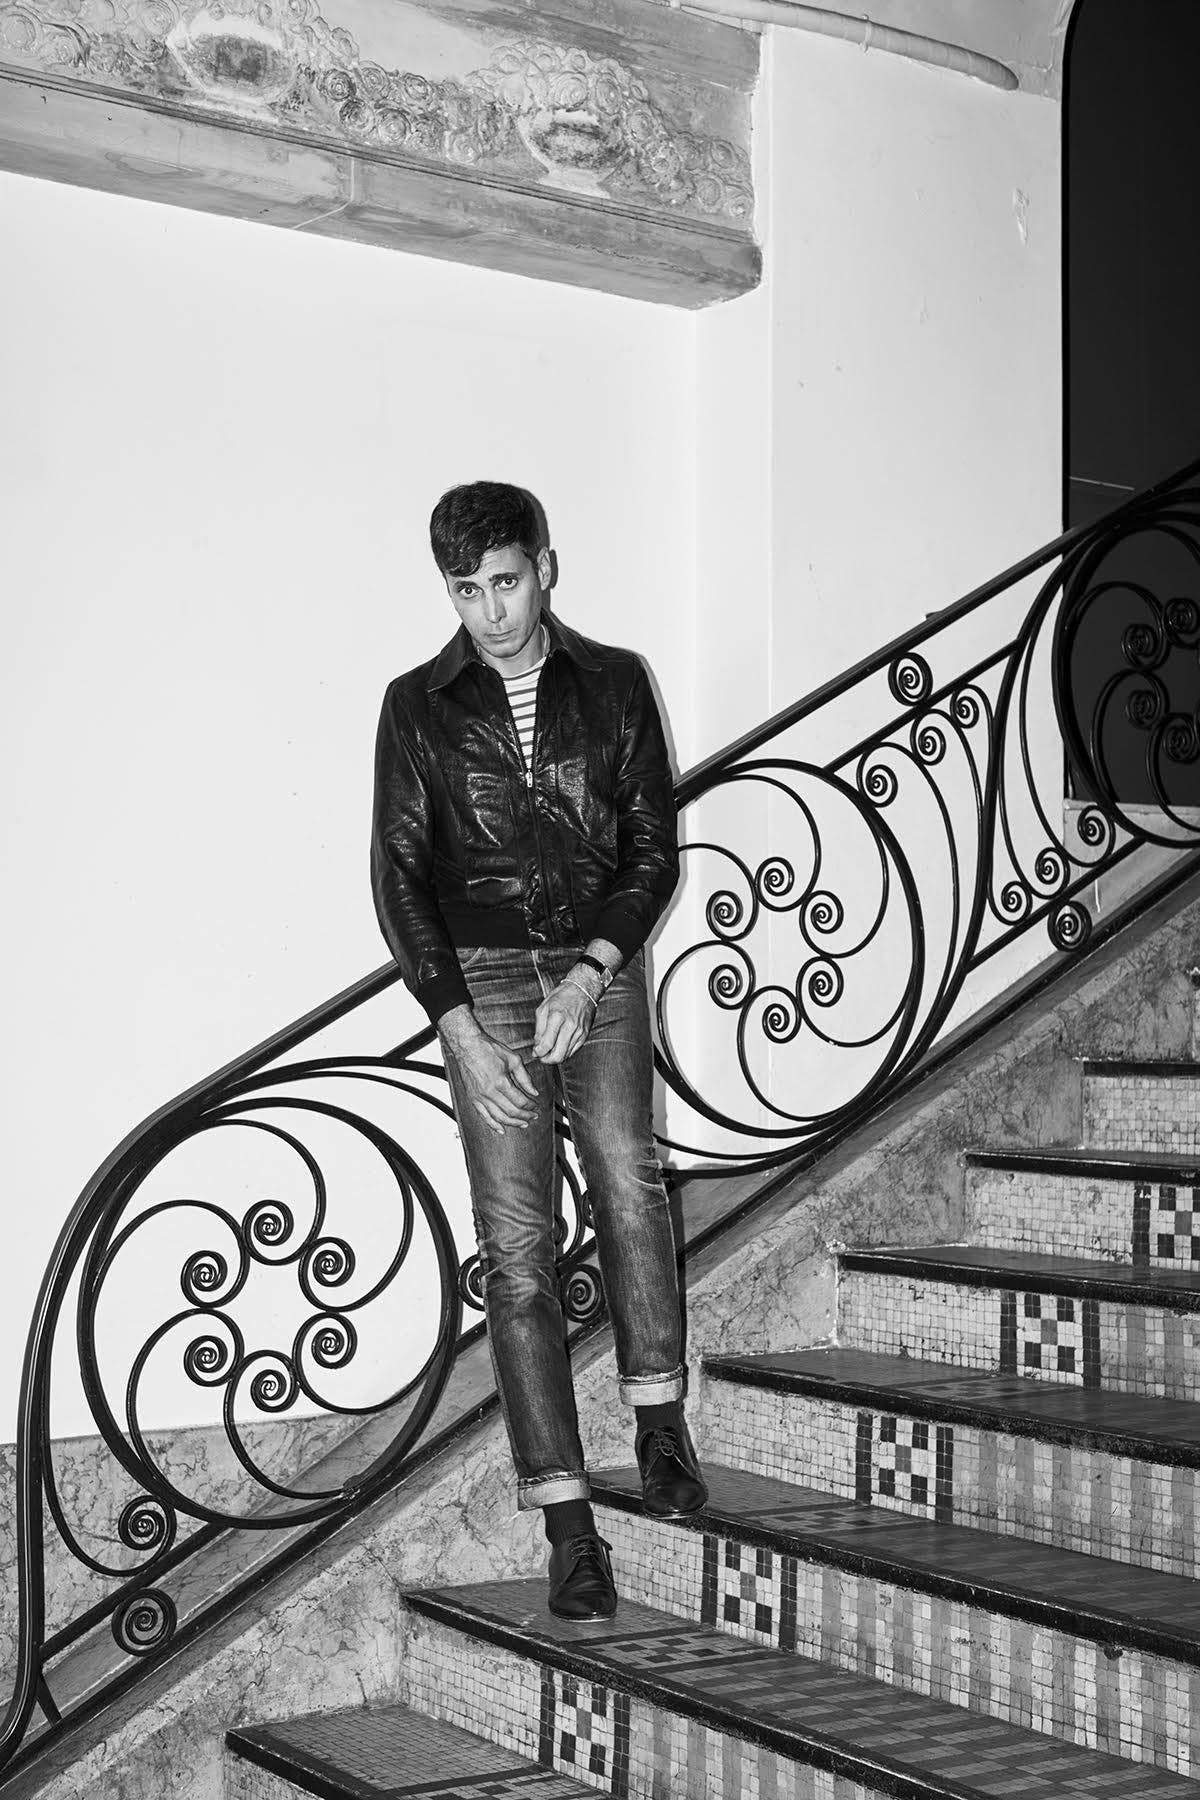 What Made Hedi Slimane Leave His Signature Skinny Jeans Behind?